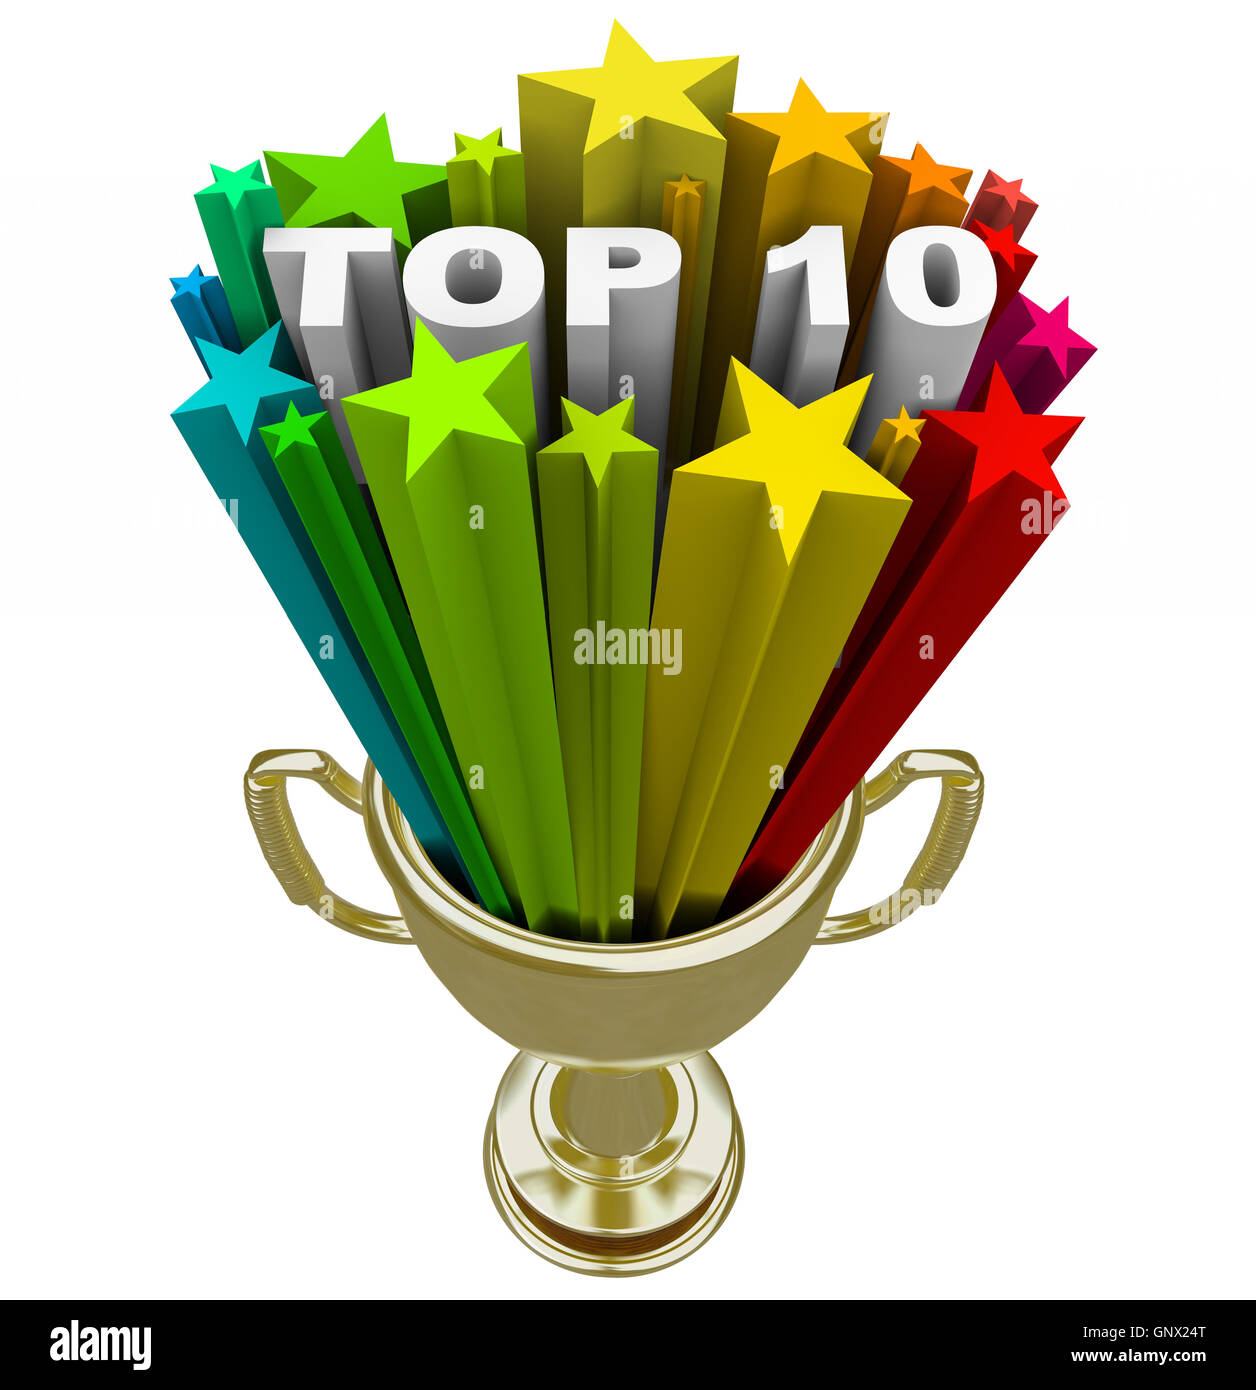 Top Ten Ranking List Showing Best Choices and Quality Stock Photo